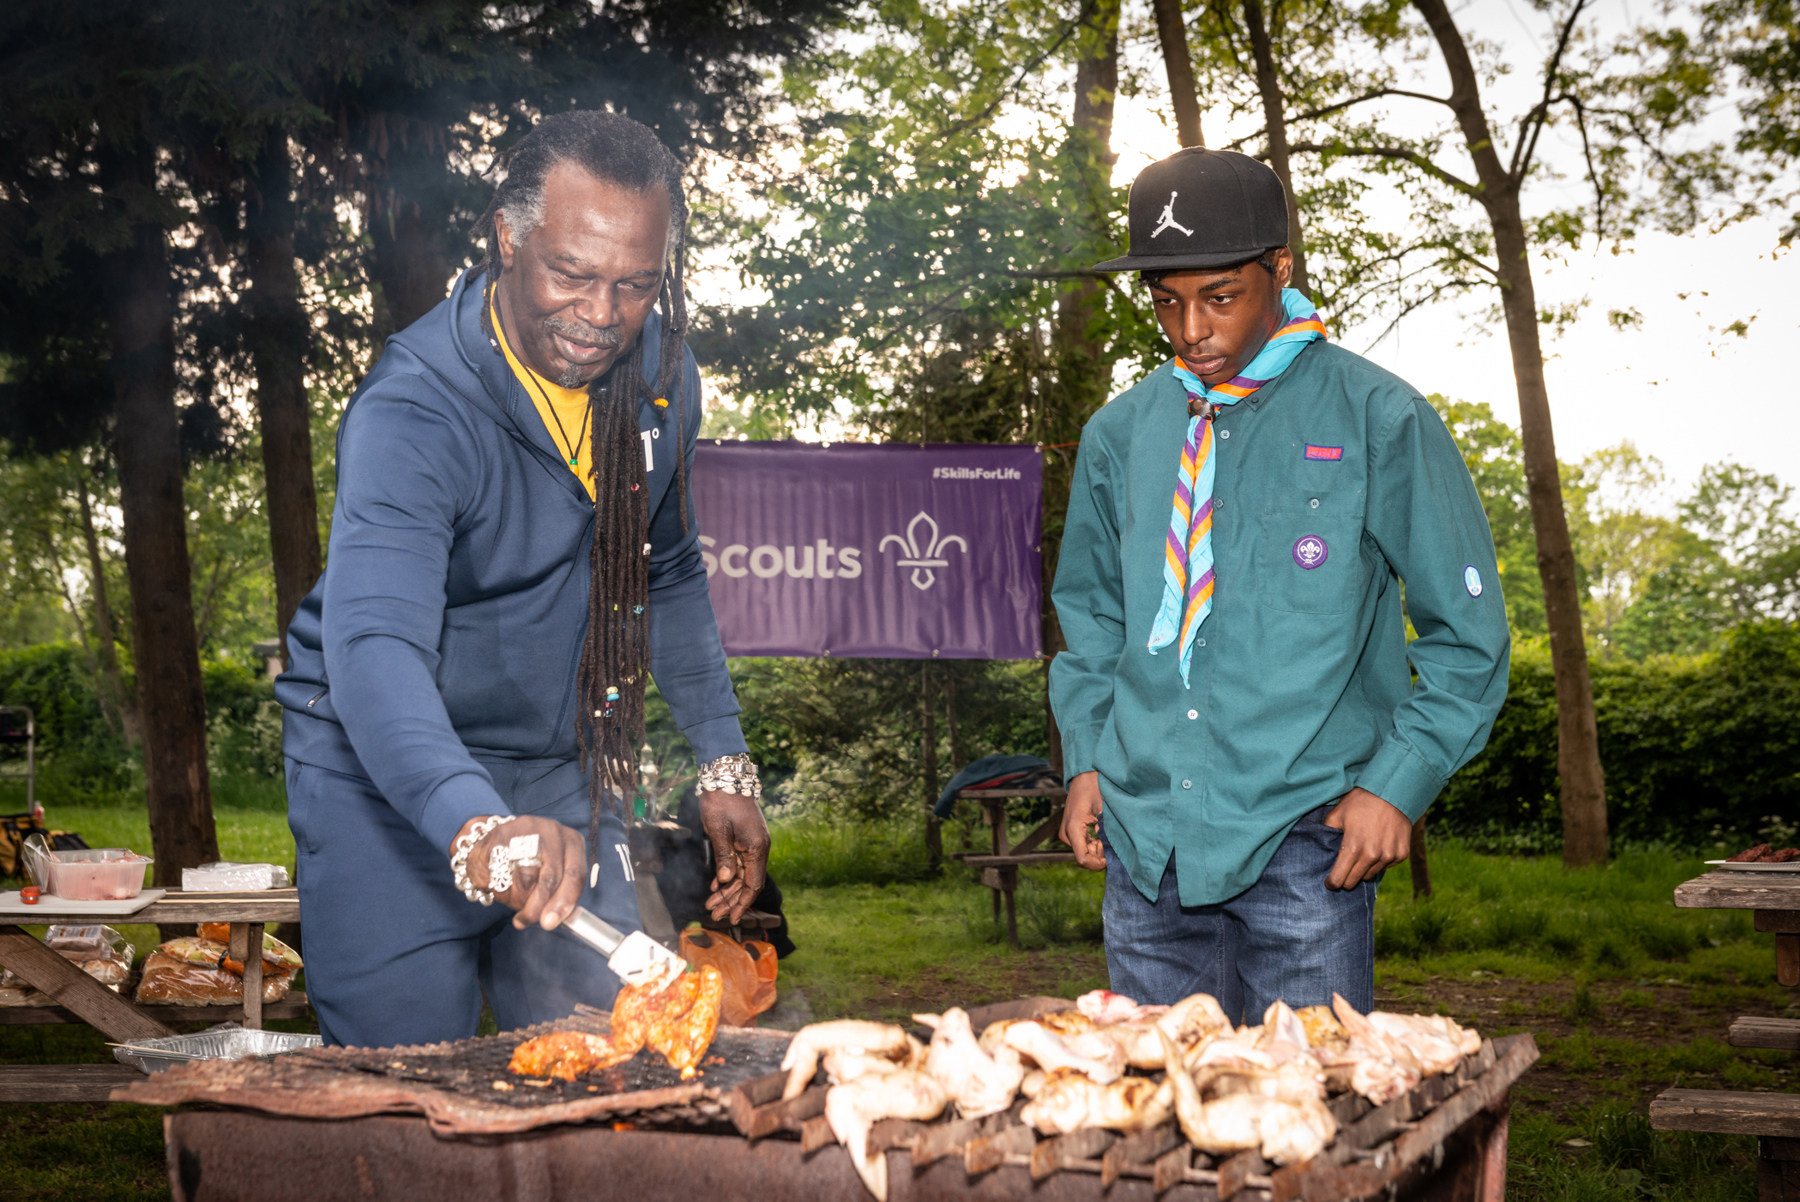 Levi Roots joins Scouts and NCS to launch BB-Thank-Q | News | Scouts